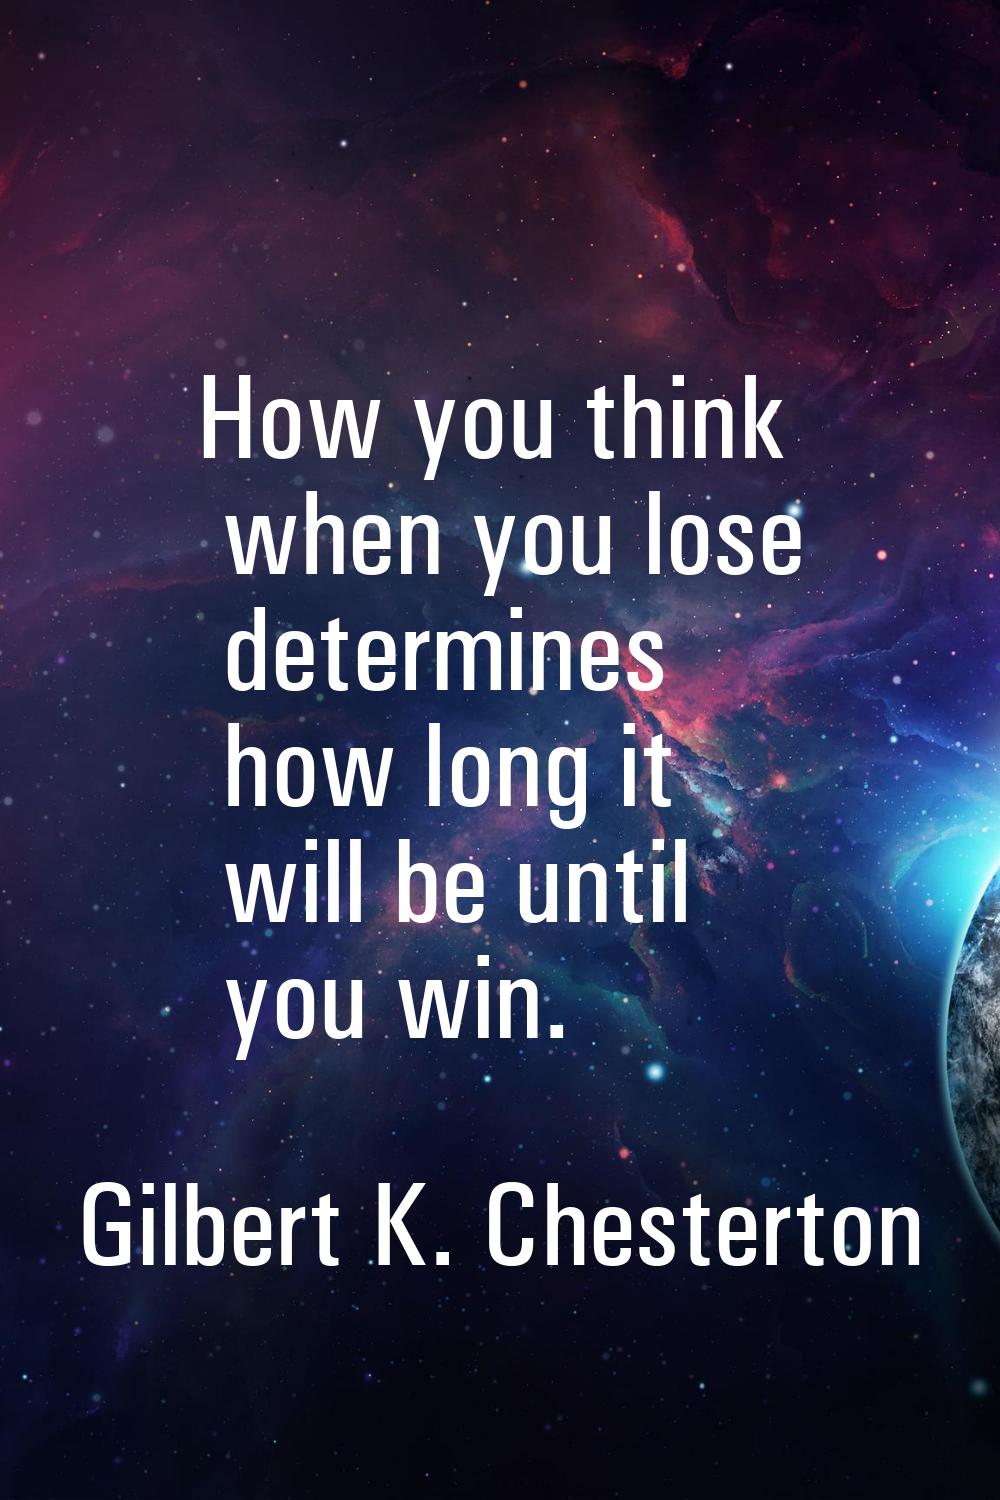 How you think when you lose determines how long it will be until you win.